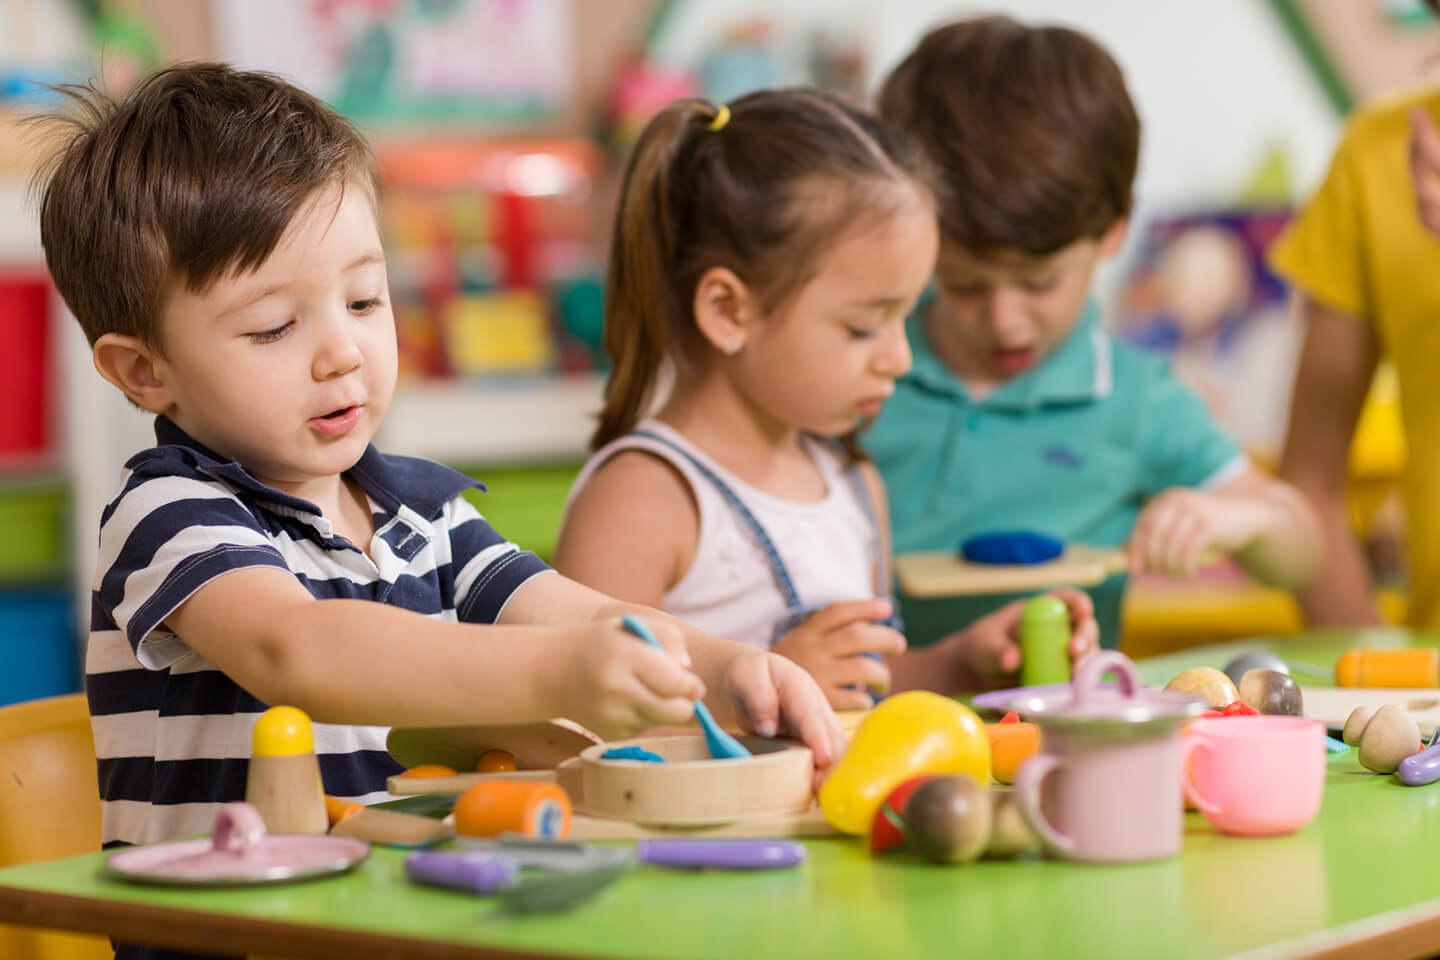 Young children playing with various toys on a table at a childcare center in the Newcastle area of NSW